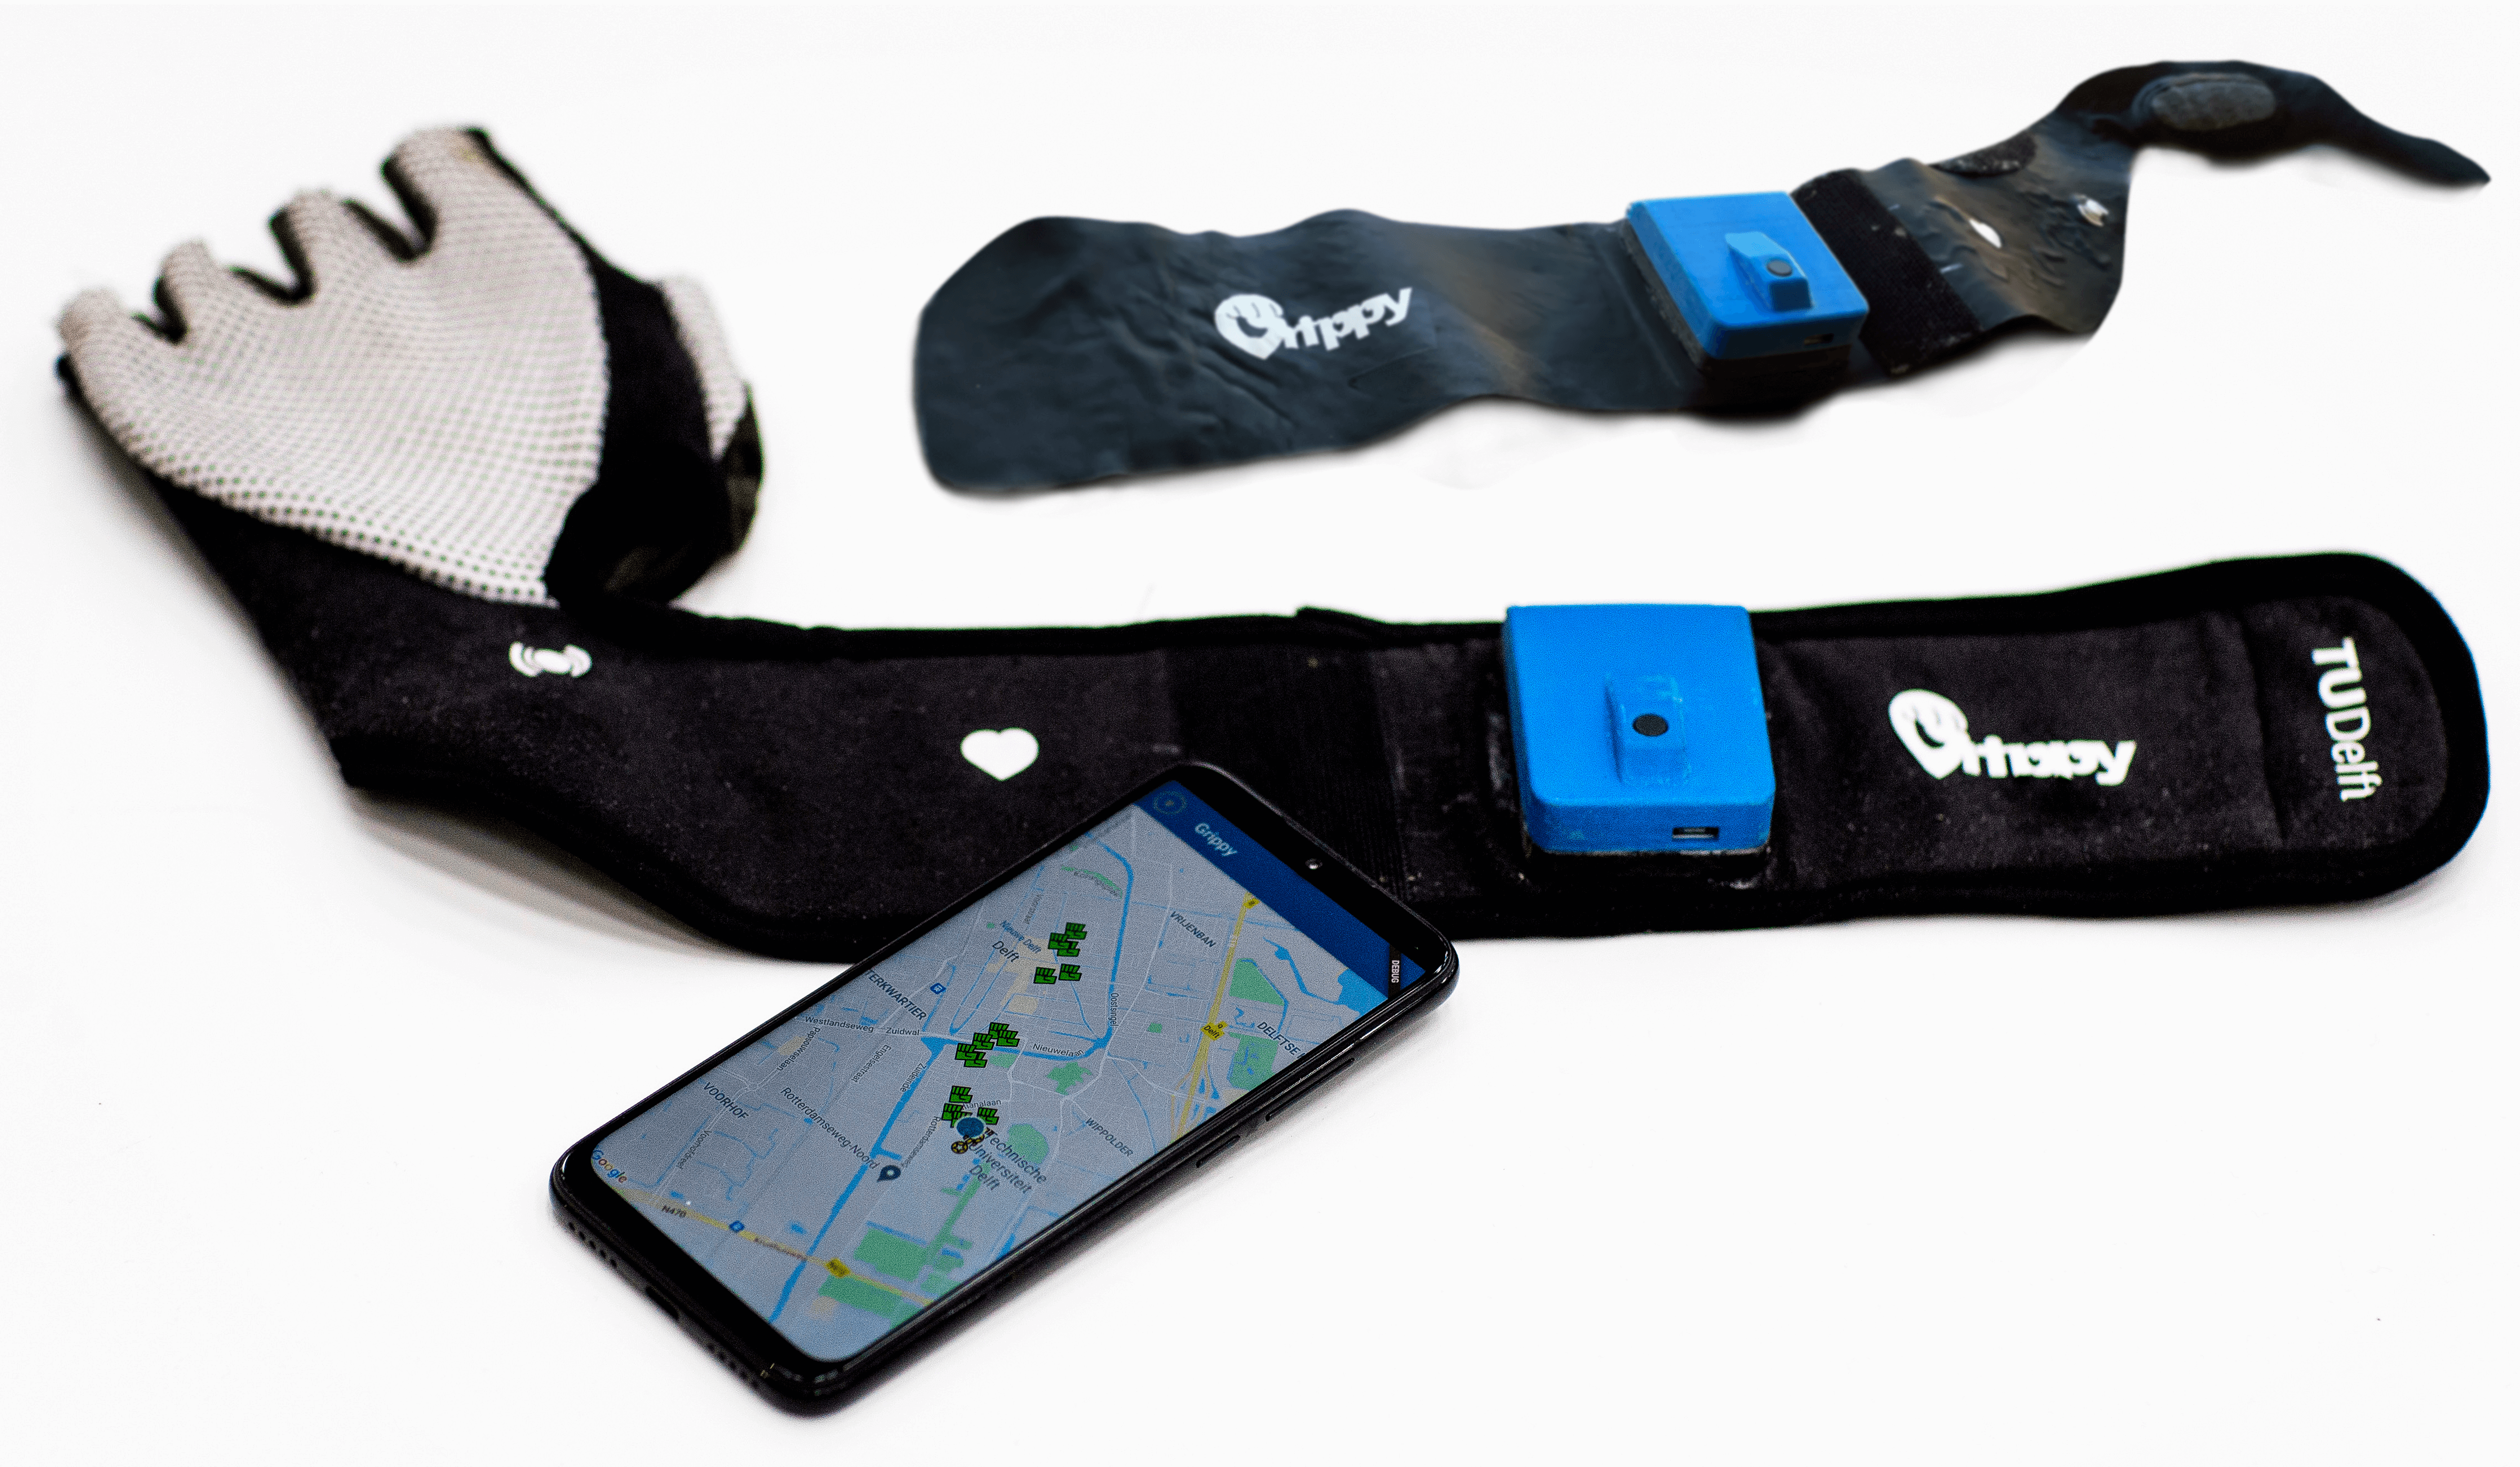 The complete set of the sensor glove, the receiver and the smartphone